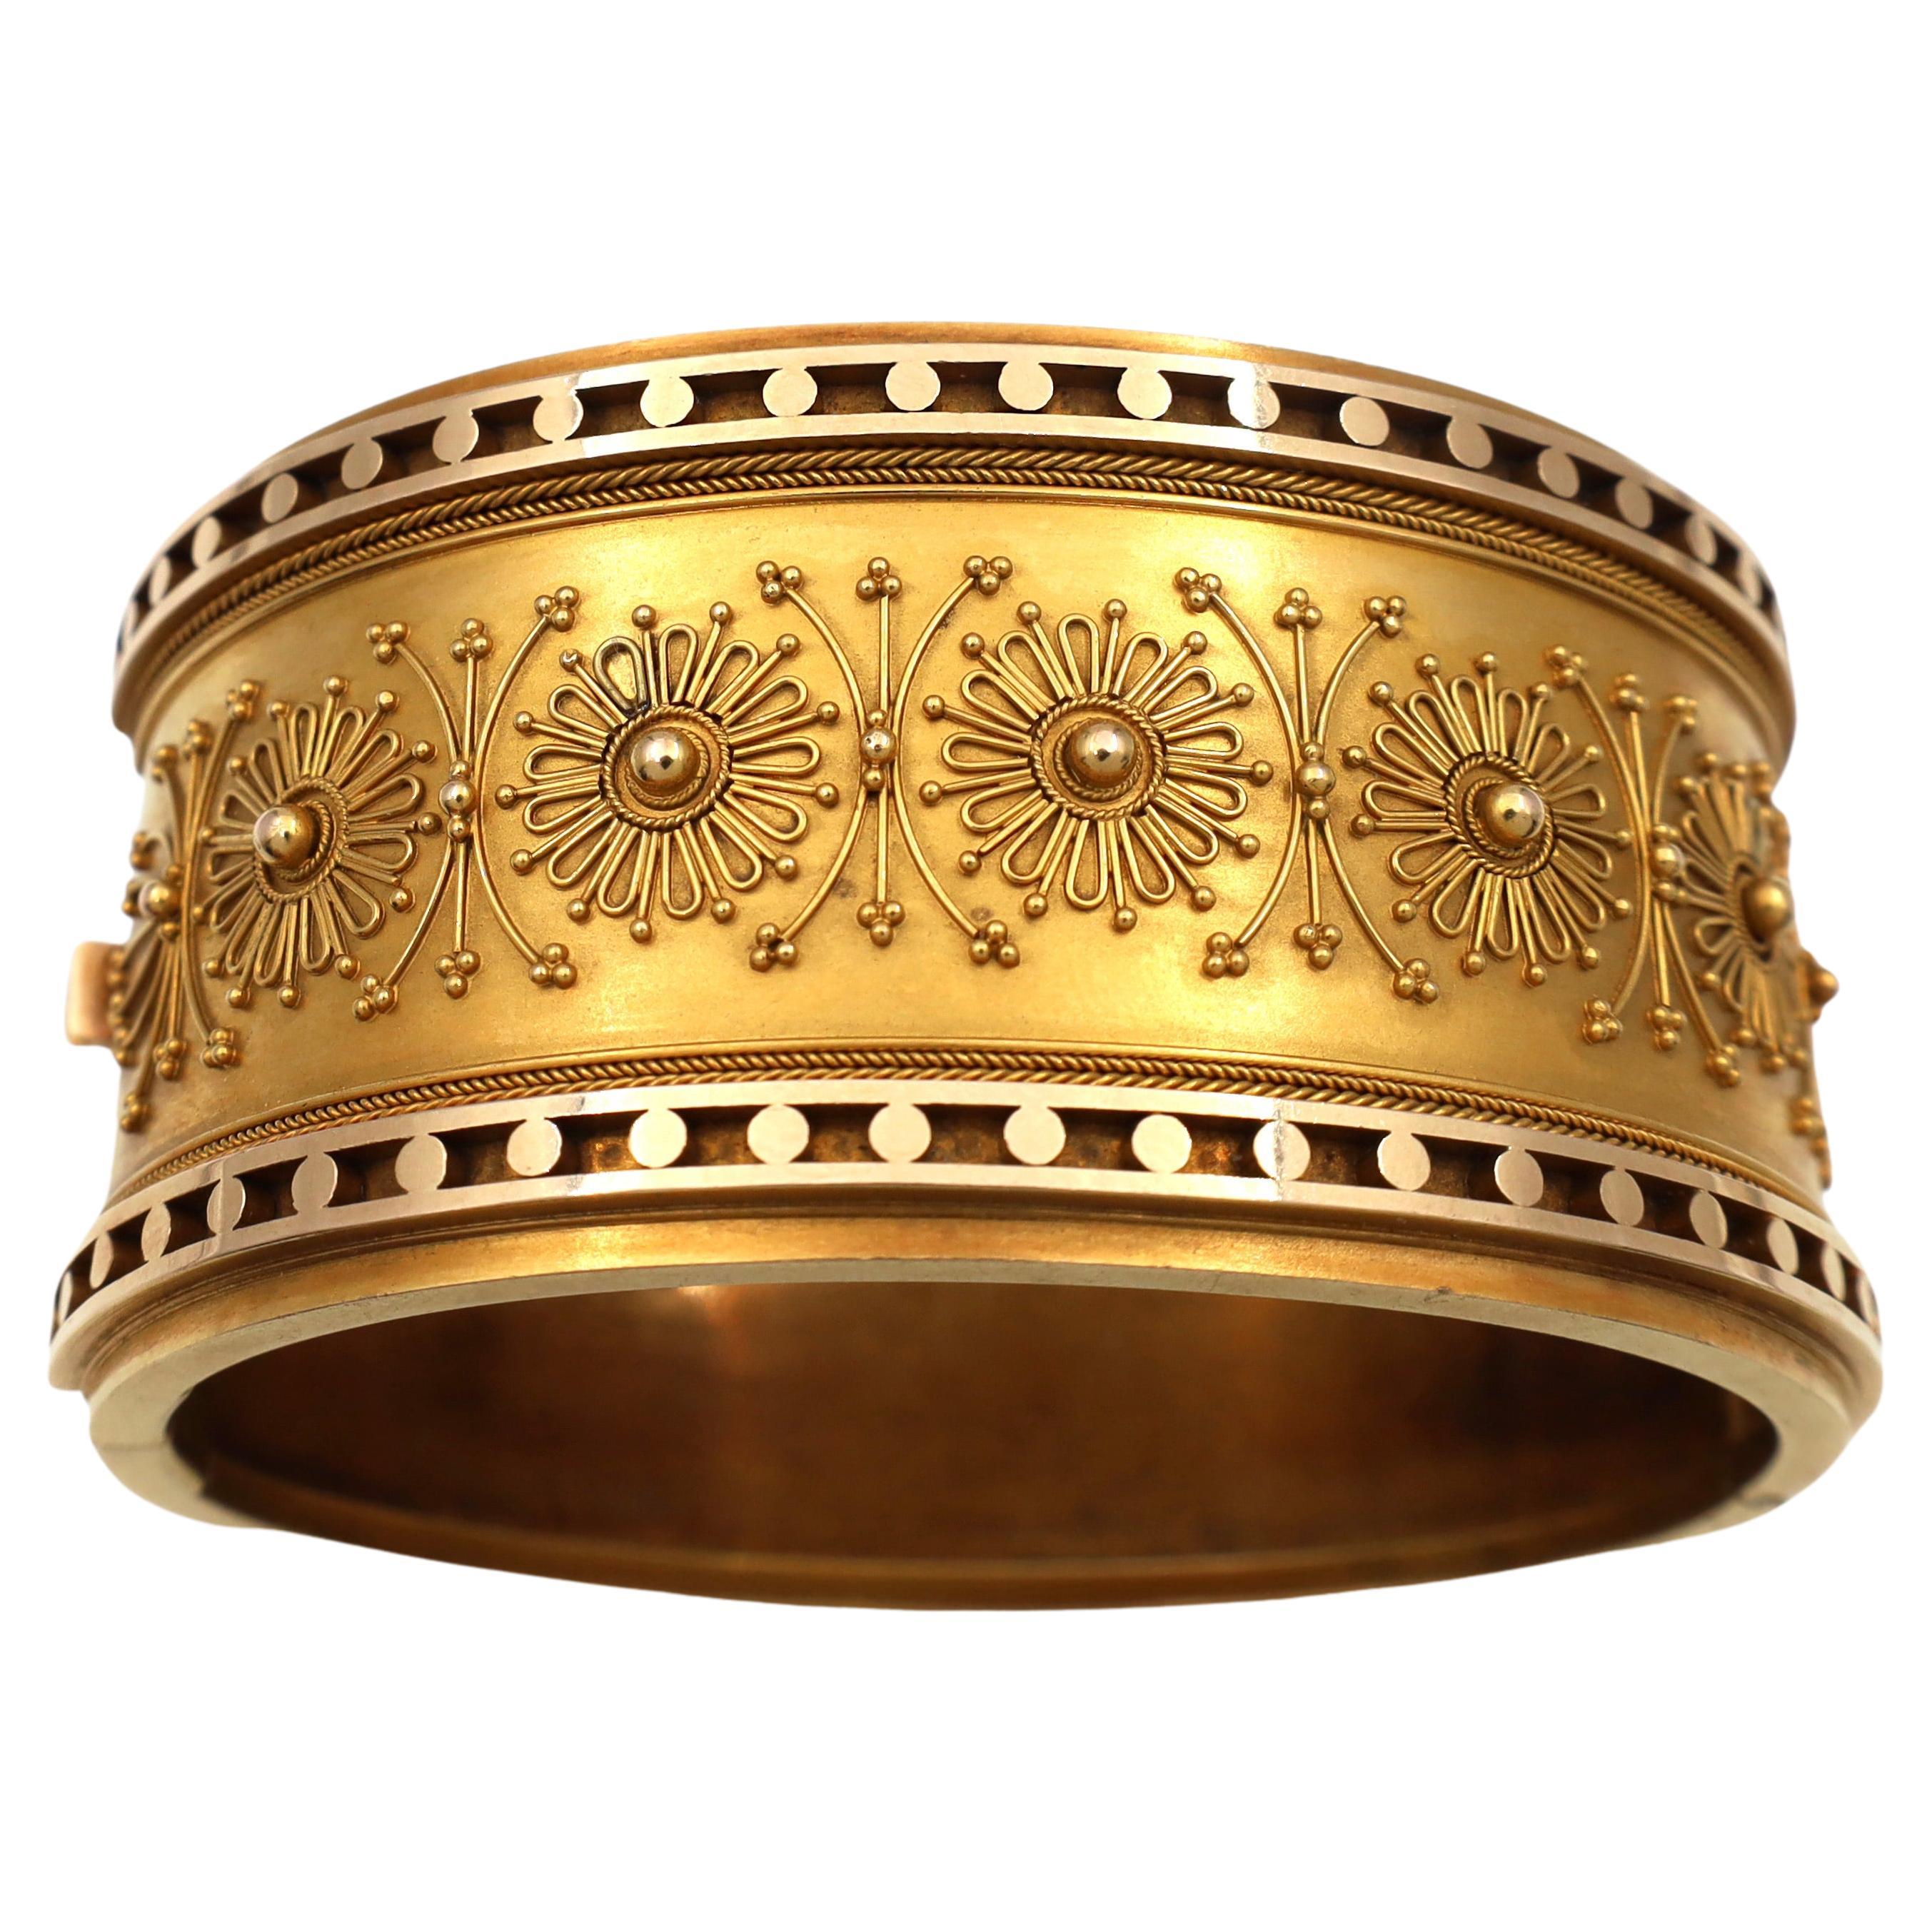 Victorian Etruscan revival 15kt yellow gold cuff bangle